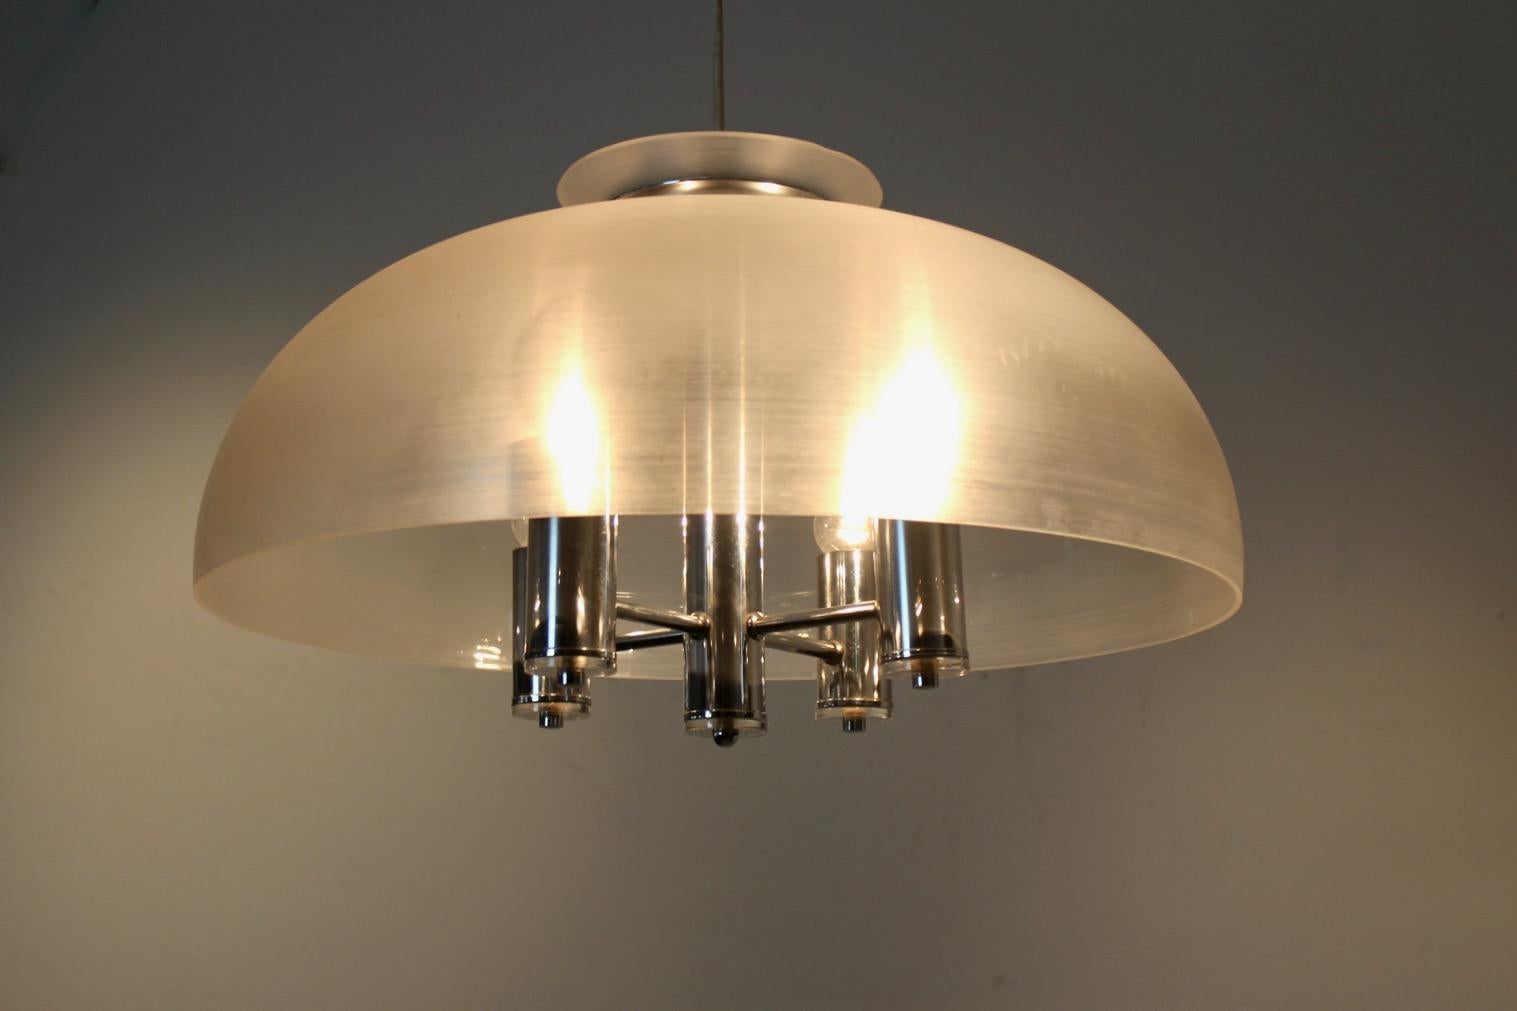 Beautiful pendant by Doria Leuchten, Germany, 1960s. The pendant comes with a Lucite Dome with inside a small chrome chandelier with 5 lights. It has a classic look: it is pure, simple and it gives a very stylish light. The height of the pendant is